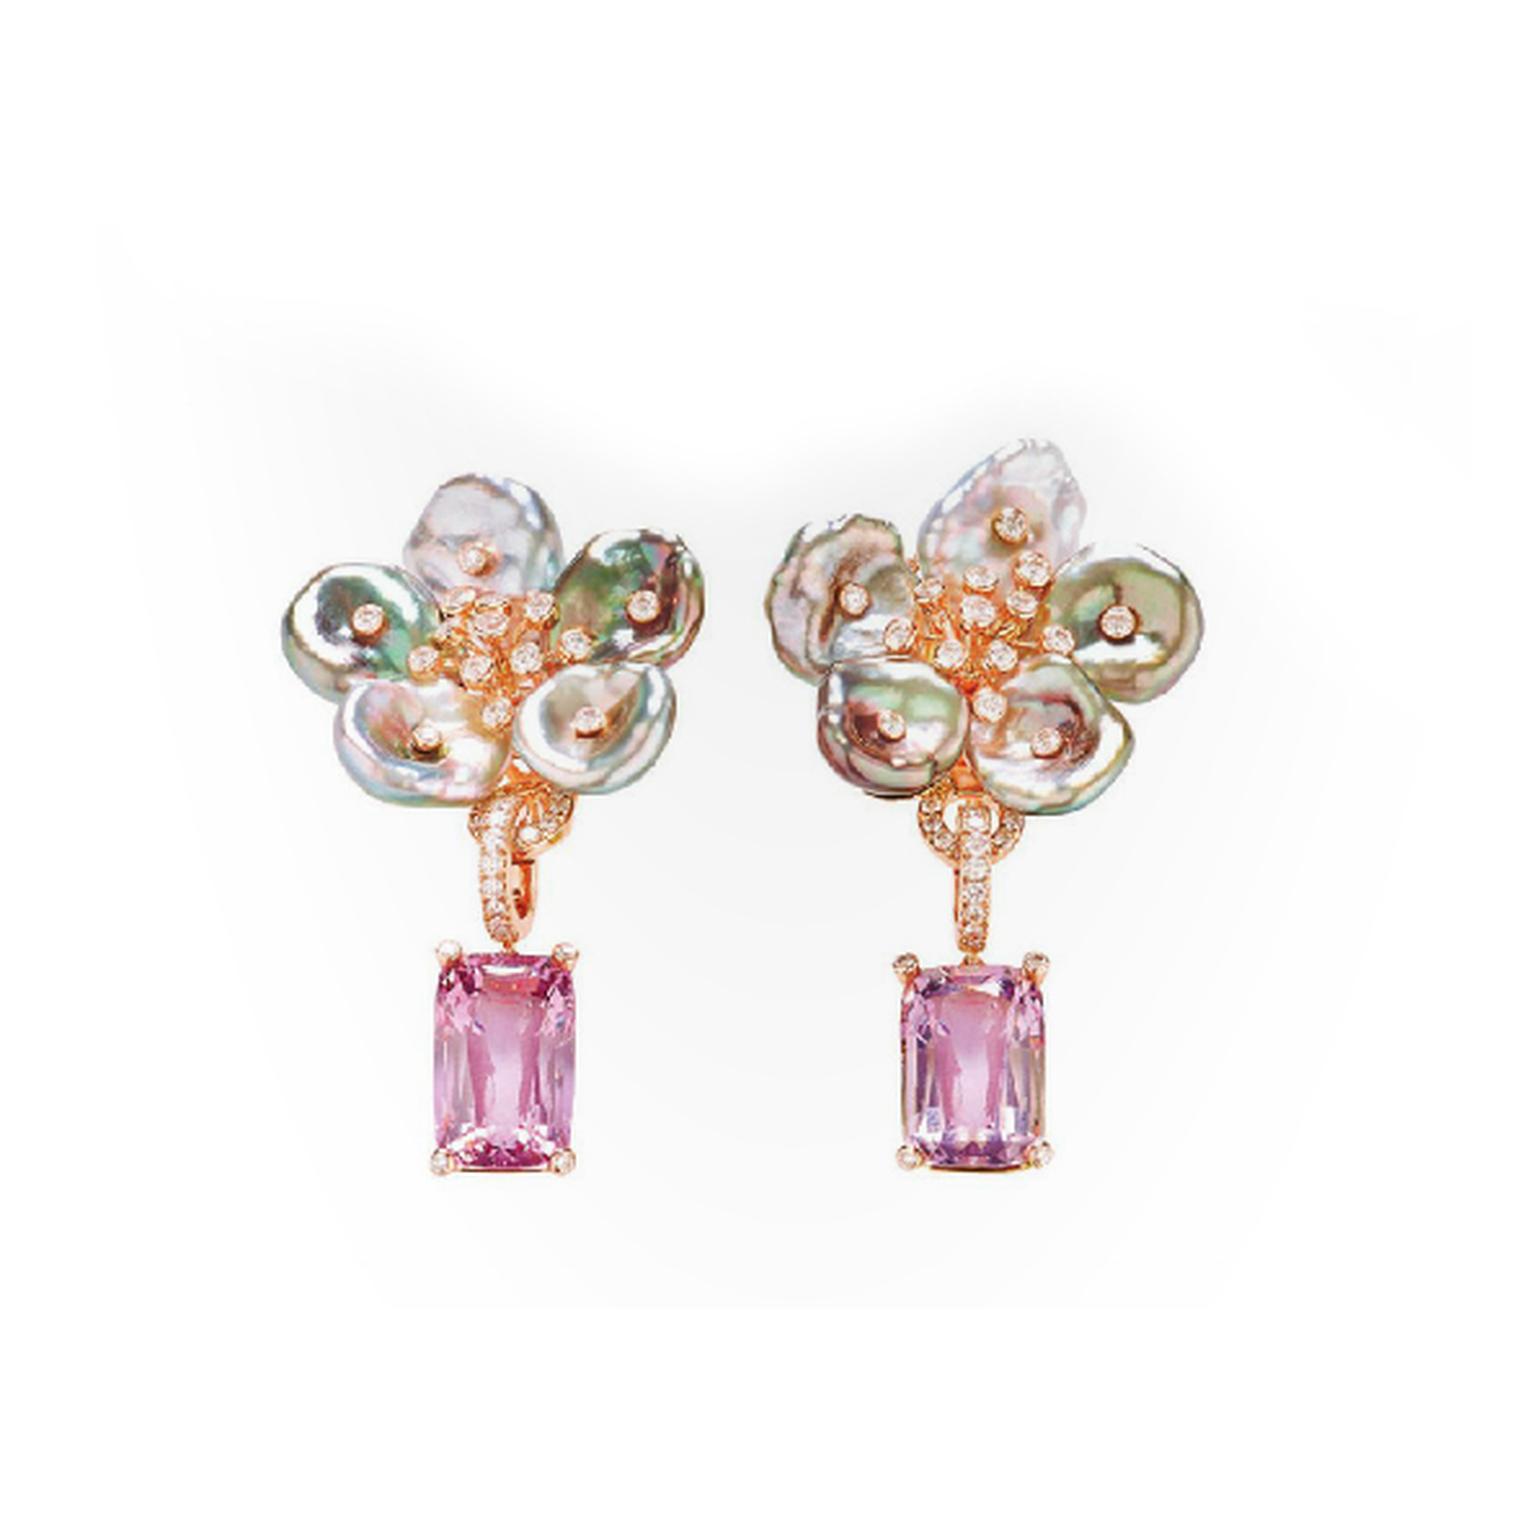 Margot McKinney Tahitian keshi pearl and diamond flower earrings with Lavender Champagne spinel drops